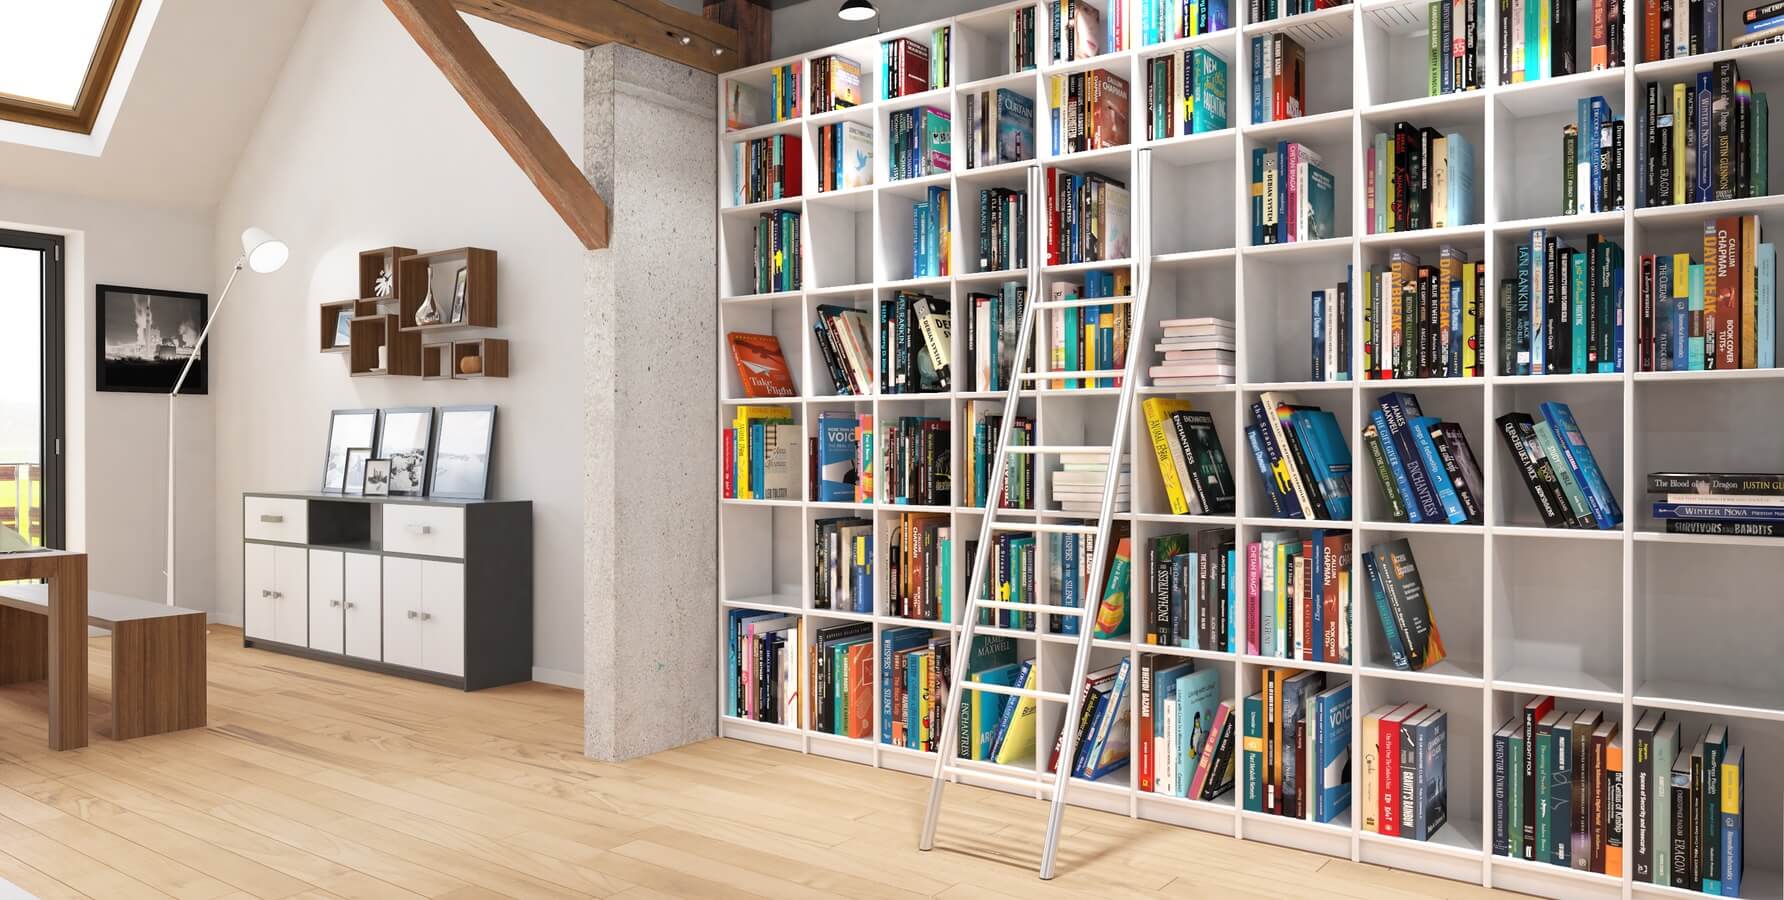 content_1784x900_shelf_library_01